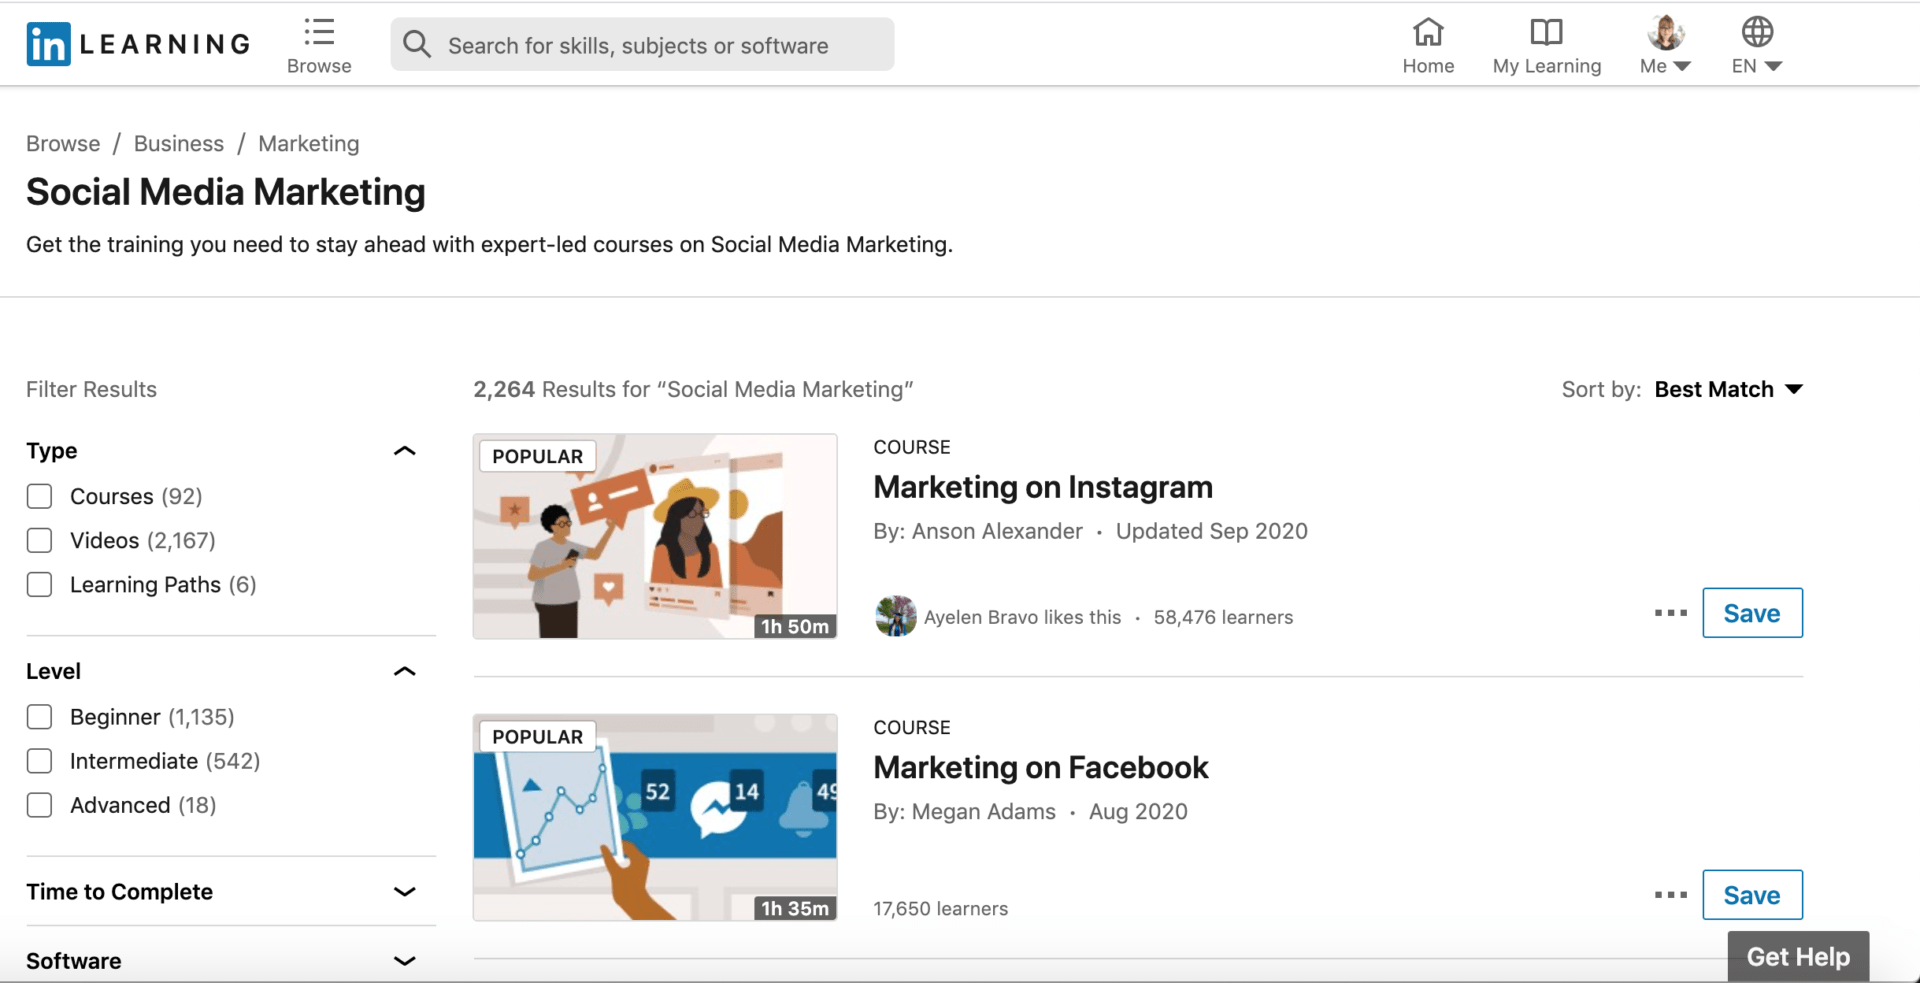 Screenshot of the LinkedIn Learning interface for marketing courses